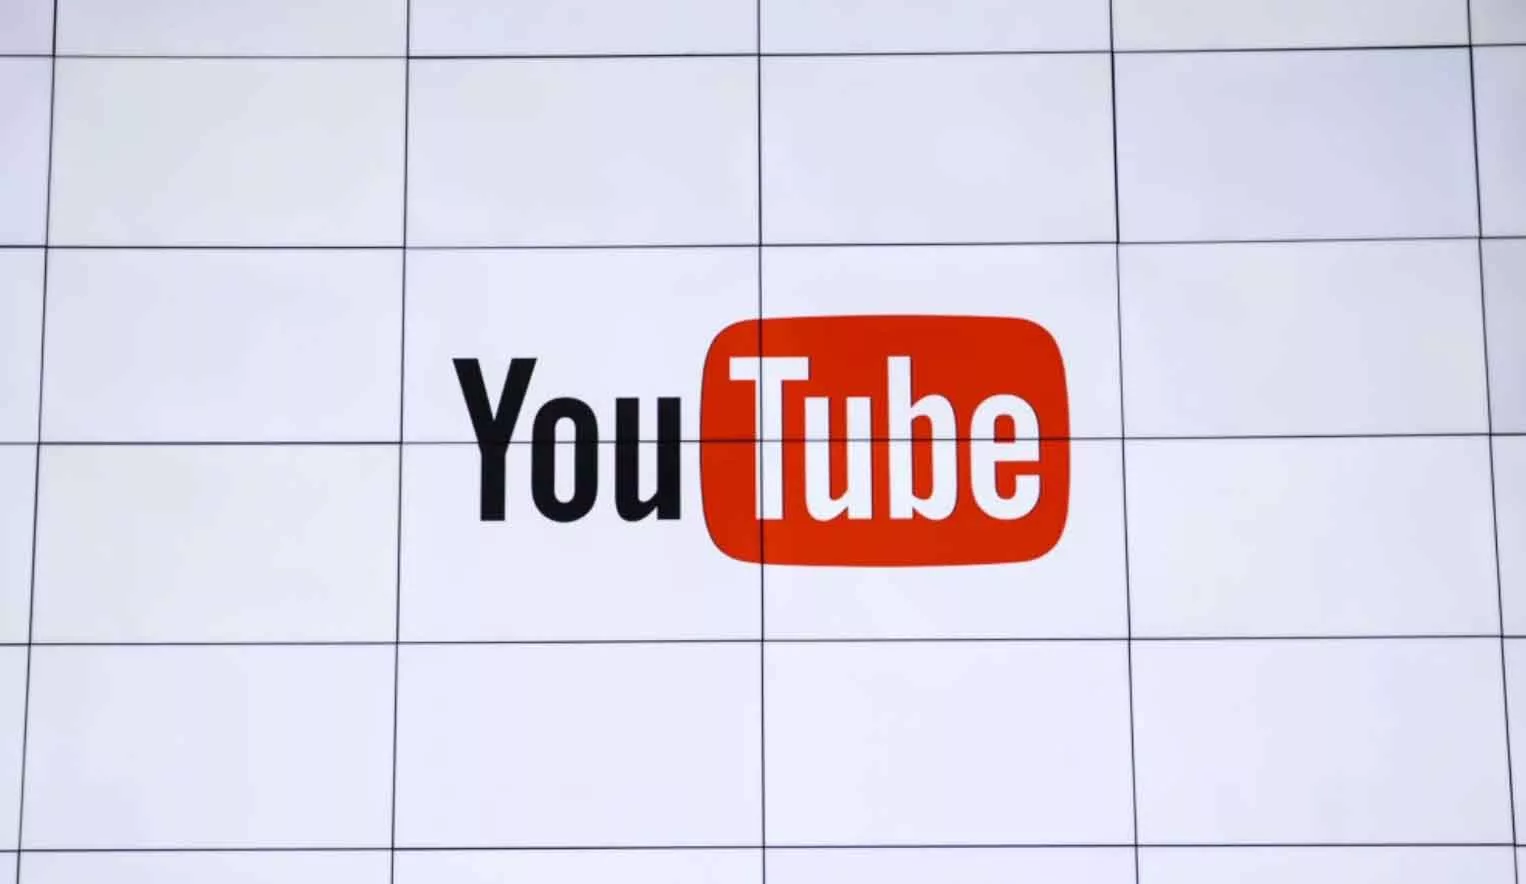 Videos can now be dubbed in multiple languages on YouTube